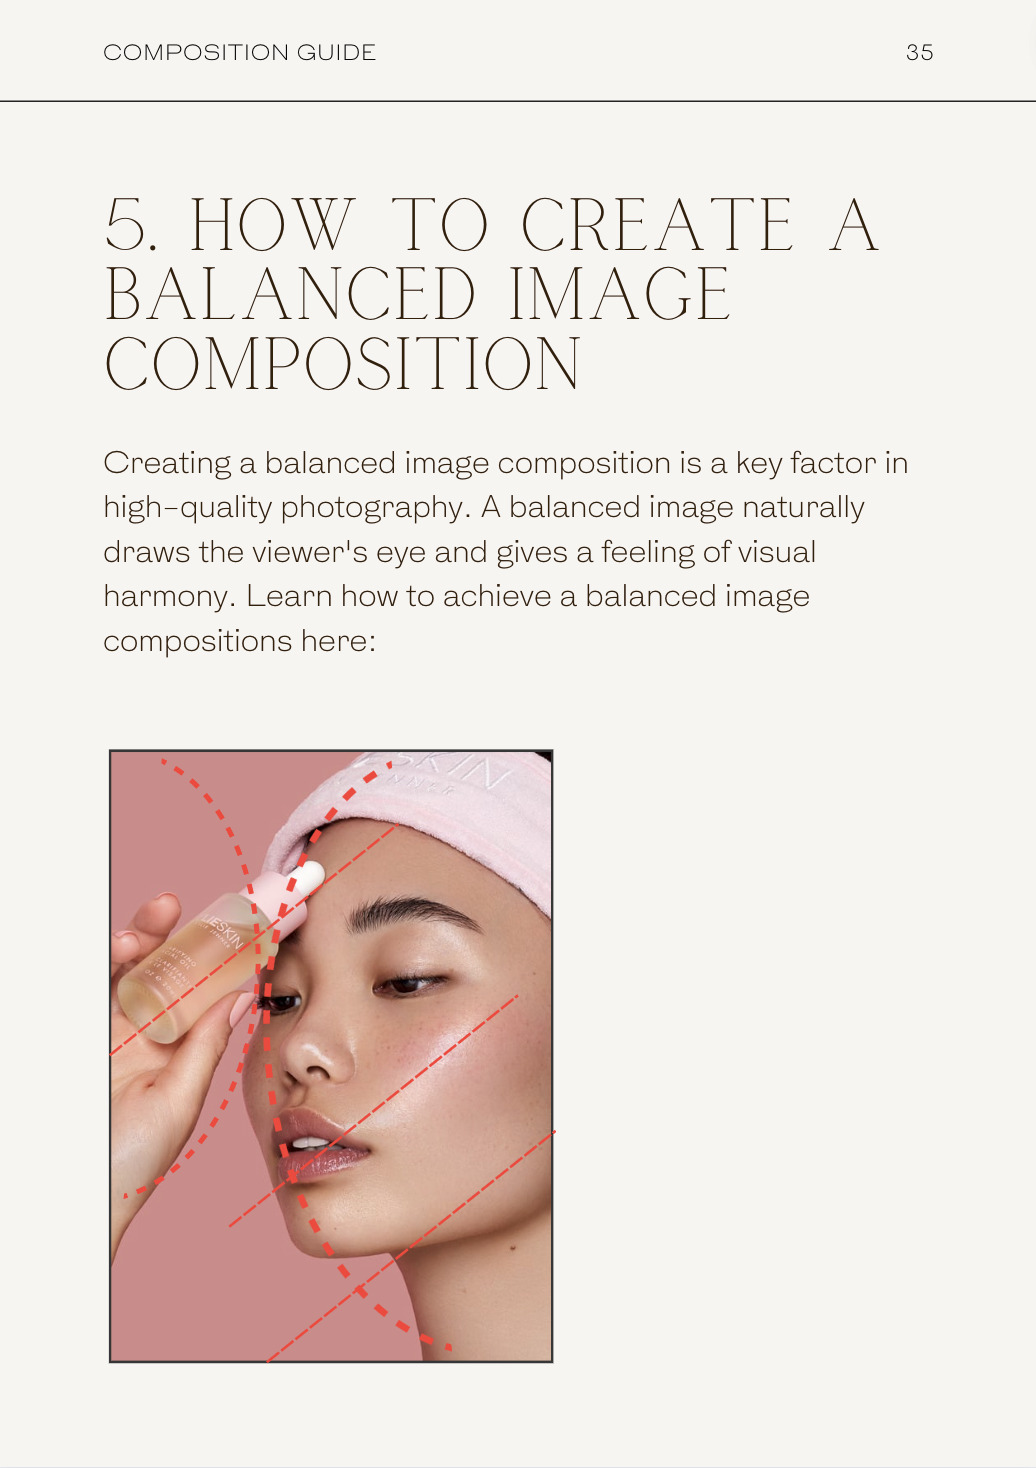 Natascha Lindemann - My Composition Rules for Beauty Photographer - Page 7 - How to create a balanced image composition- PDF Guide